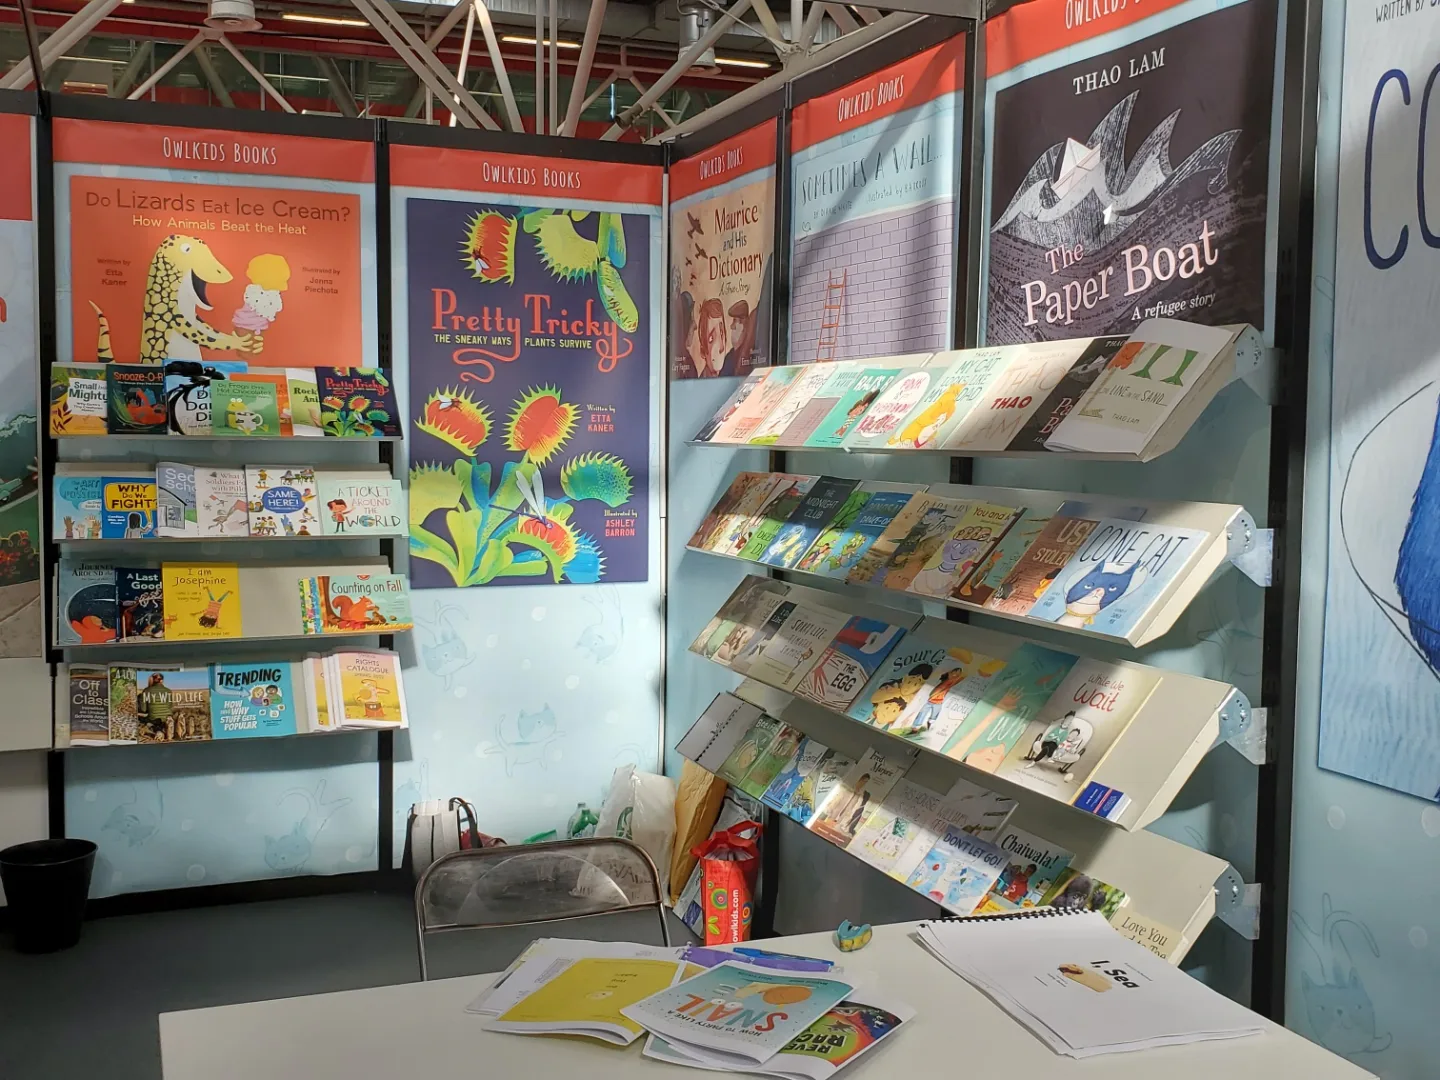 Photo showing the Owlkids Books booth at the Bologna Book Fair